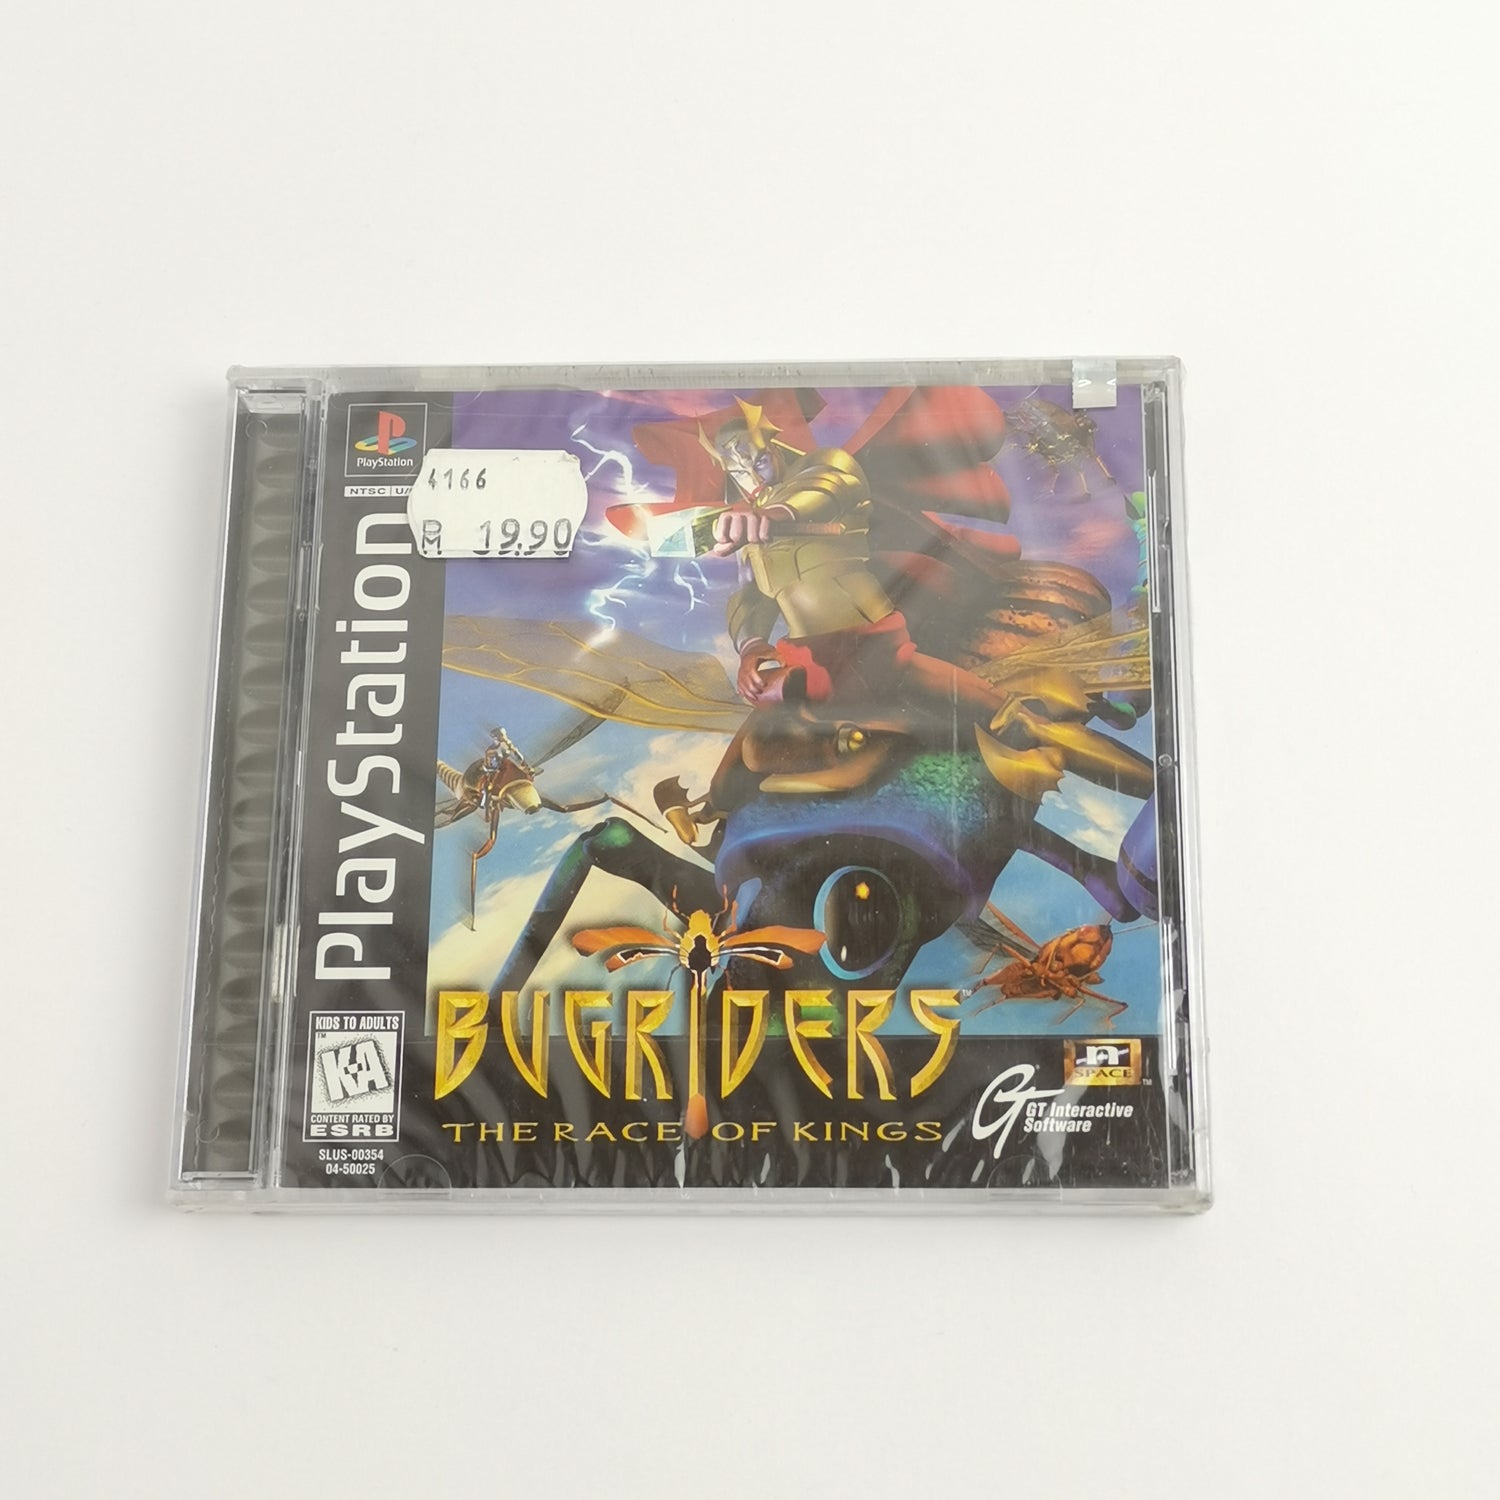 Sony Playstation 1 Game: Bugriders The Rage of Kings | PS1 NTSC-U/C USA SEALED